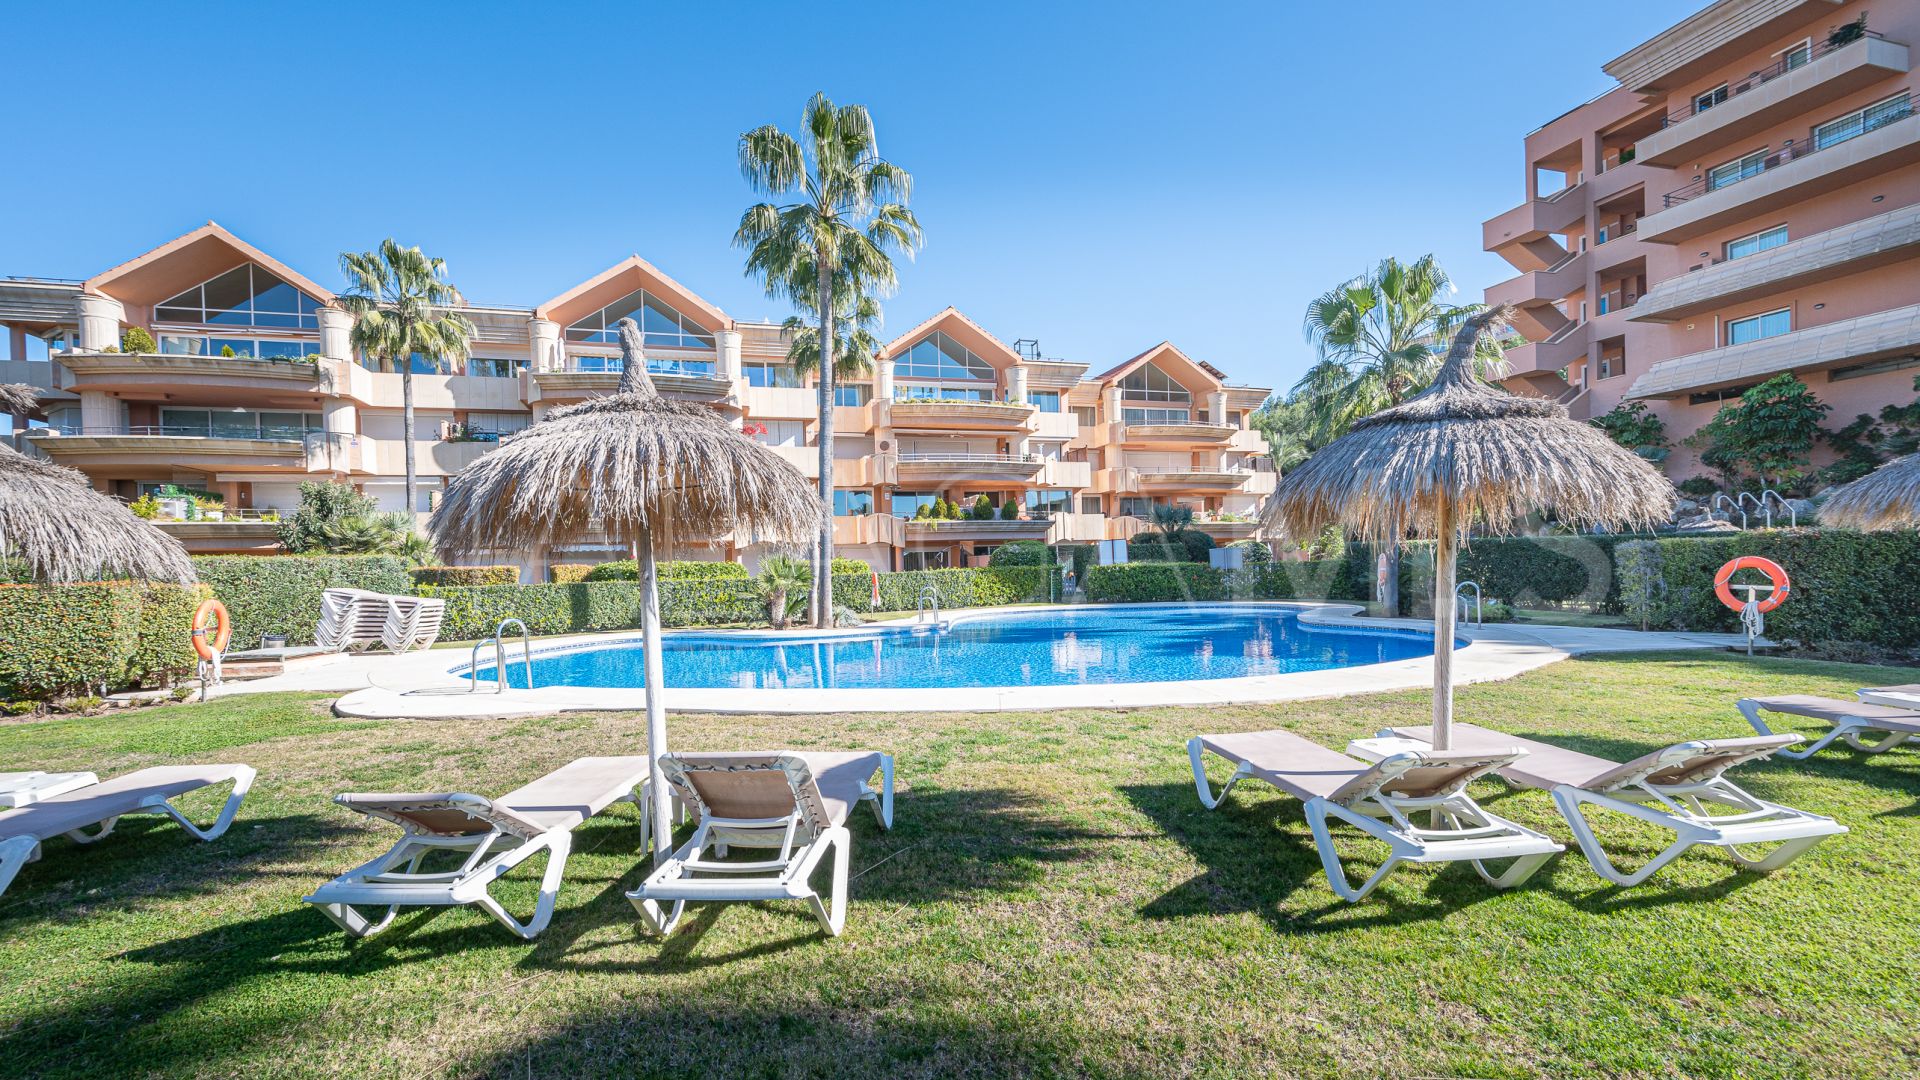 2 bedrooms Magna Marbella apartment for sale